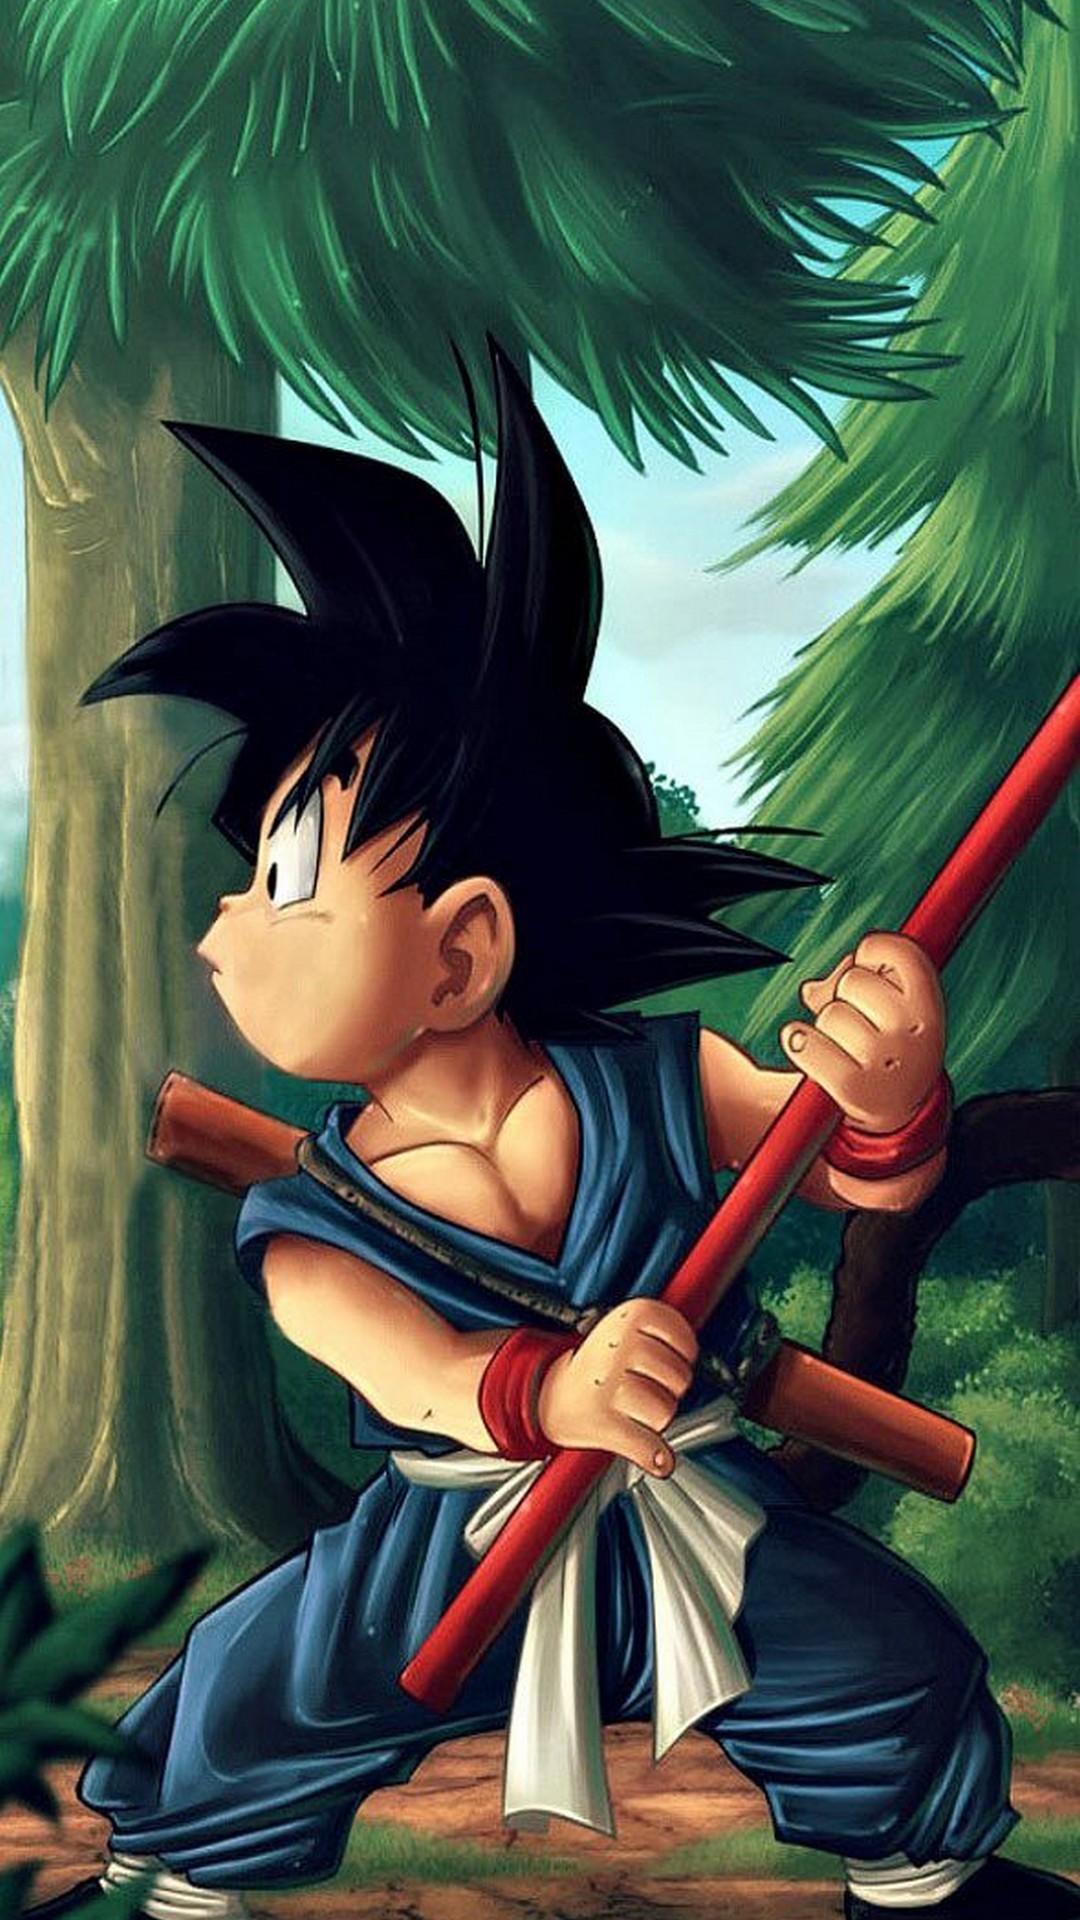 iPhone Wallpaper Kid Goku with resolution 1080X1920 pixel. You can make this wallpaper for your iPhone 5, 6, 7, 8, X backgrounds, Mobile Screensaver, or iPad Lock Screen